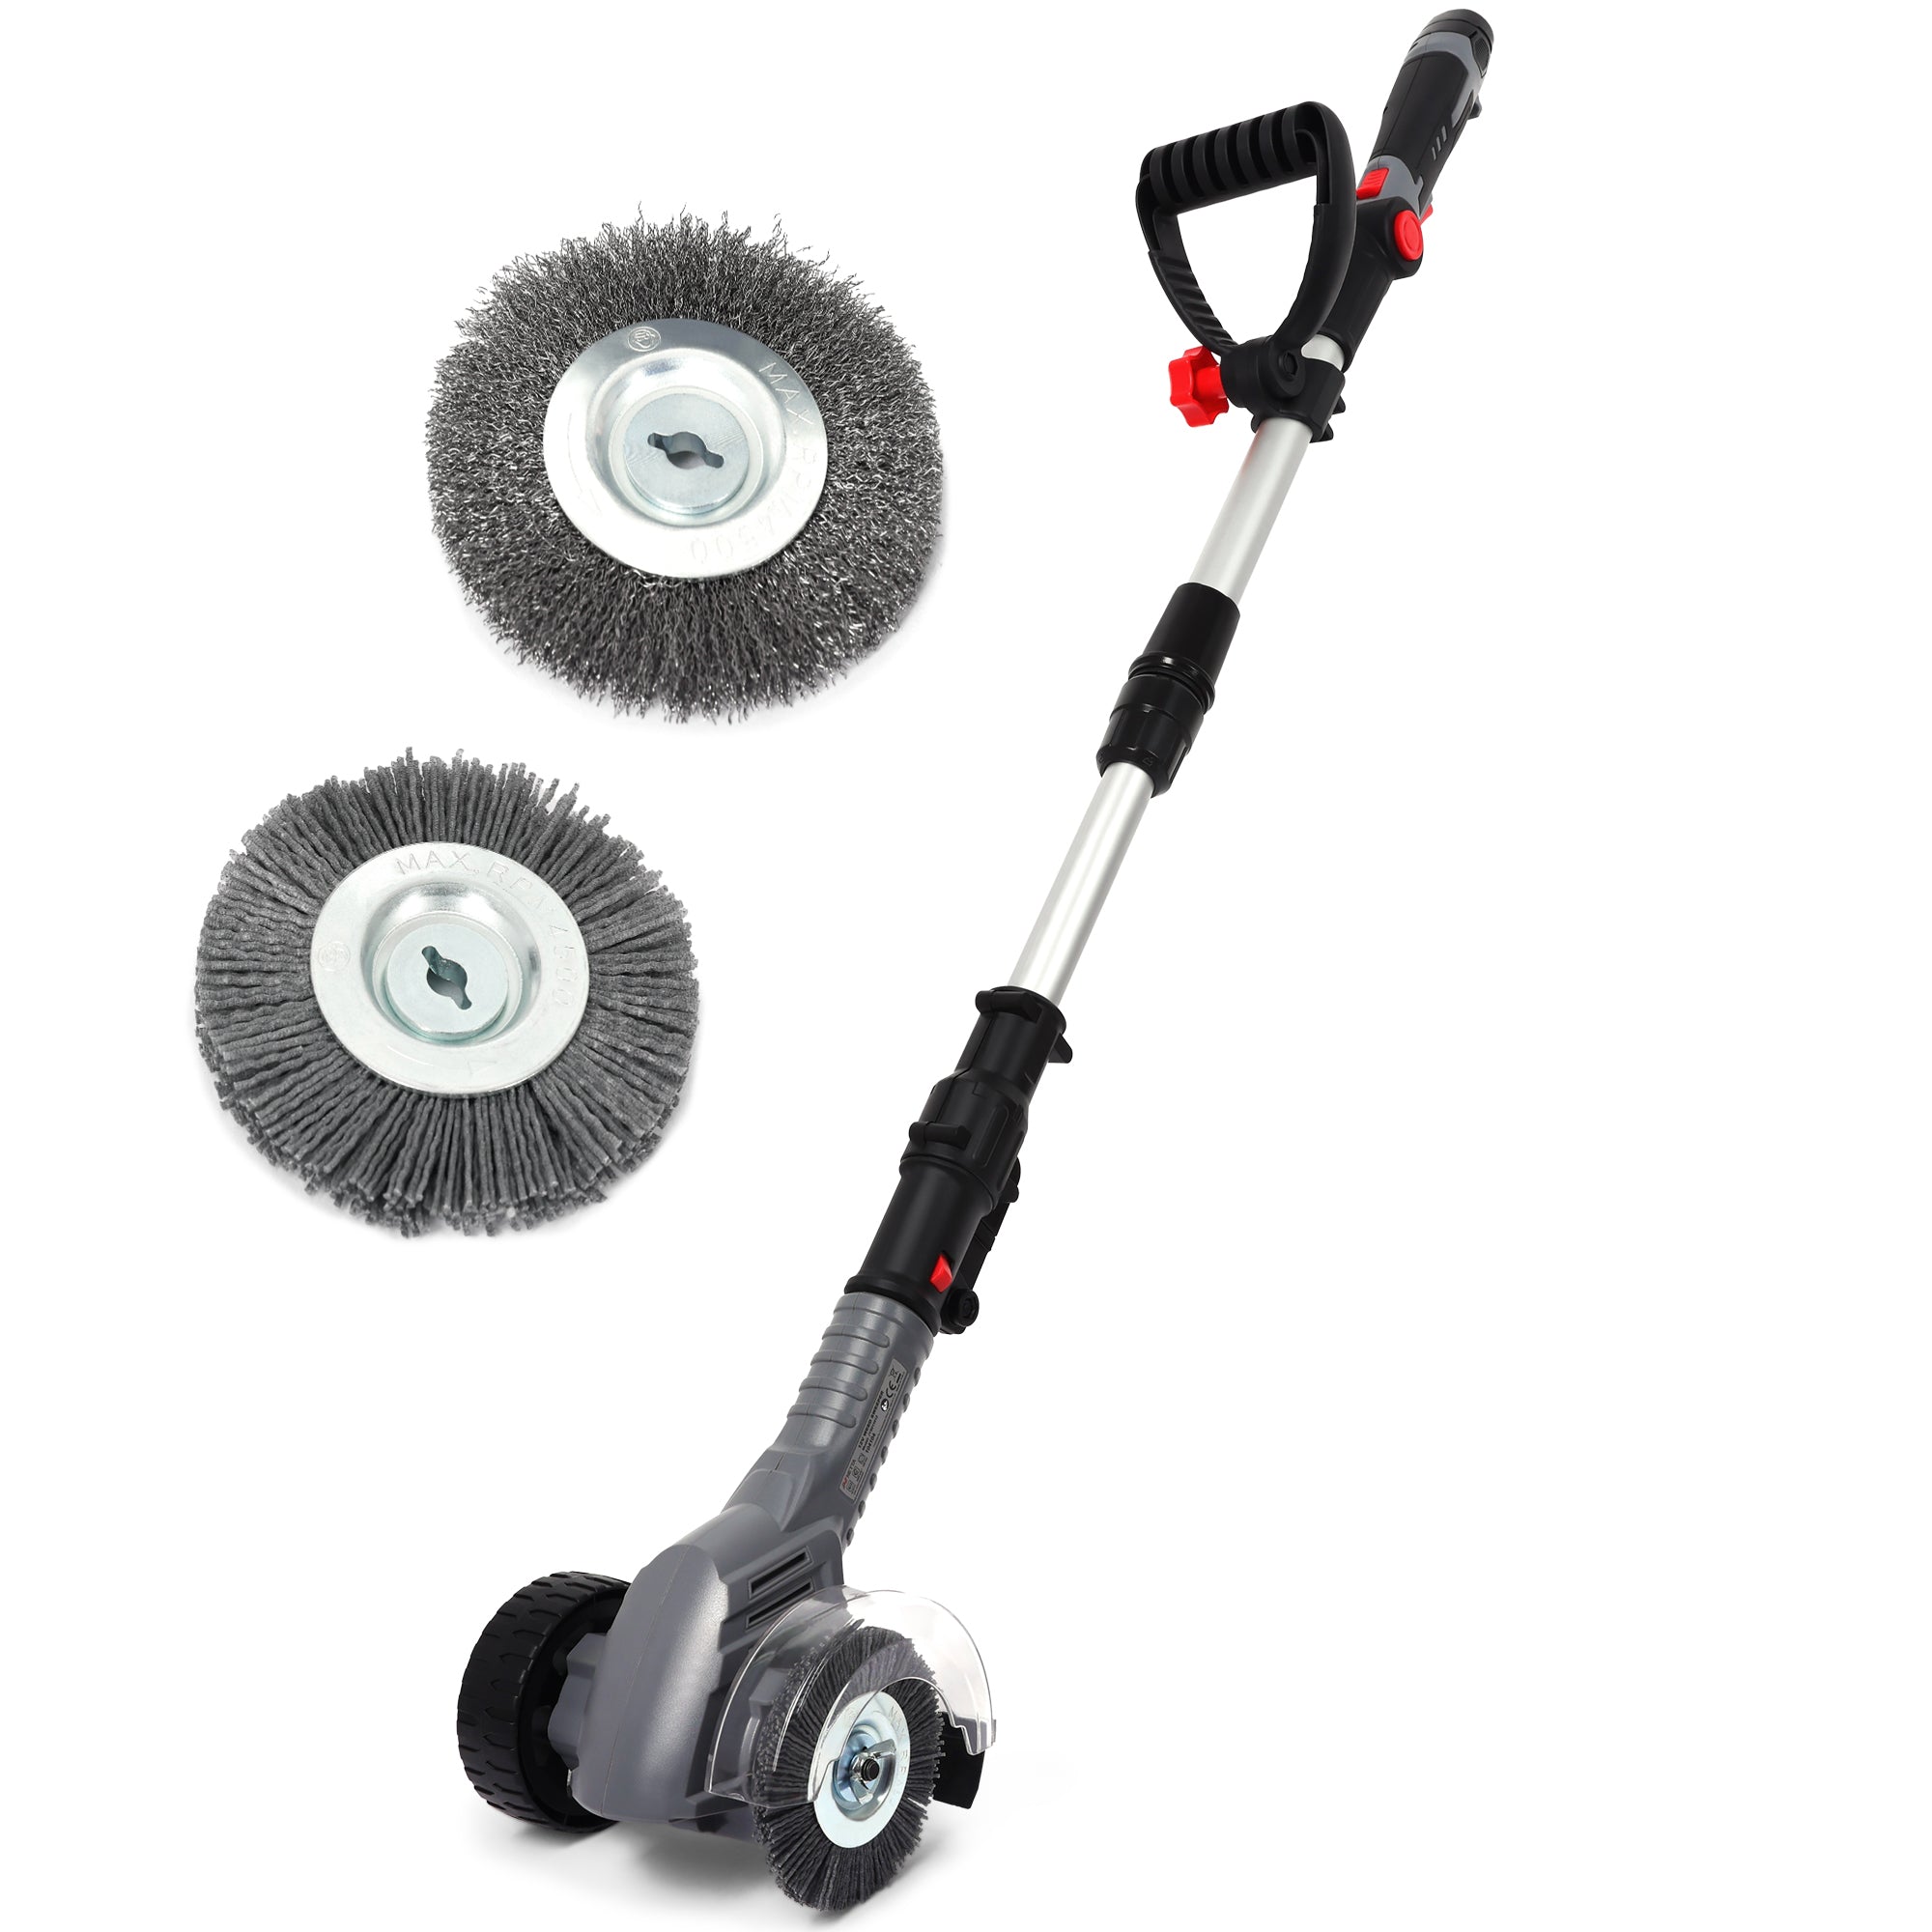 NETTA 12V Cordless Weed Sweeper Pavement Cleaner